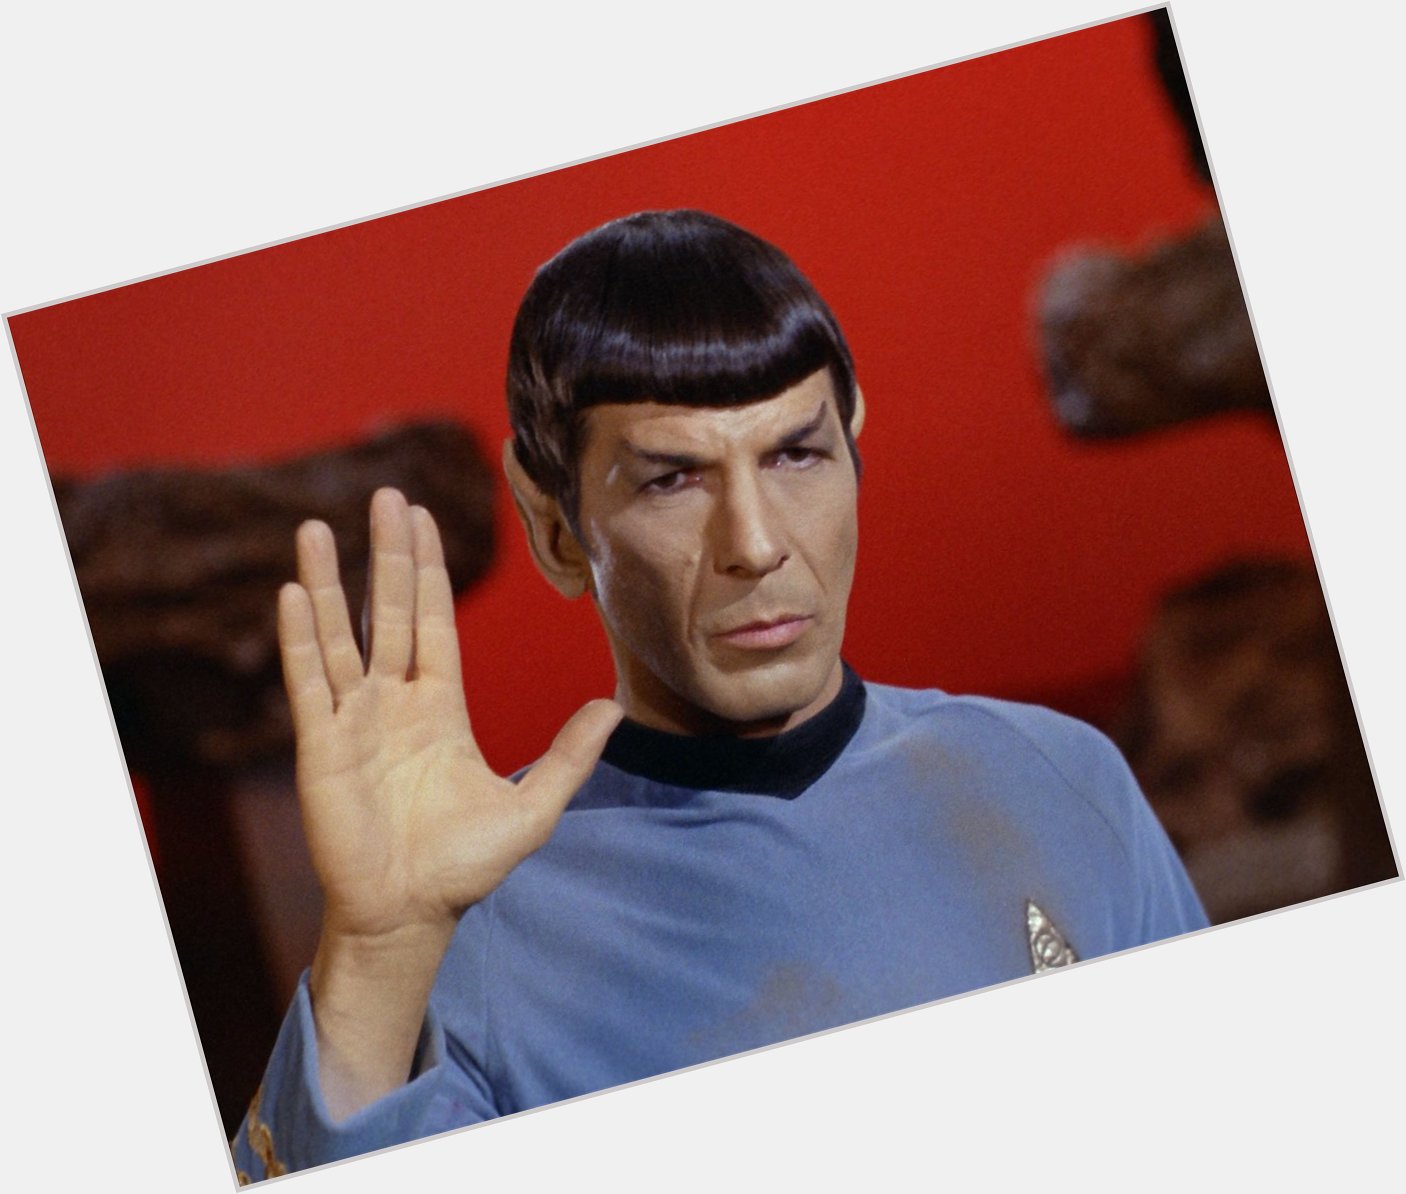 Happy Birthday to Leonard Nimoy, who would have turned 86 today! 